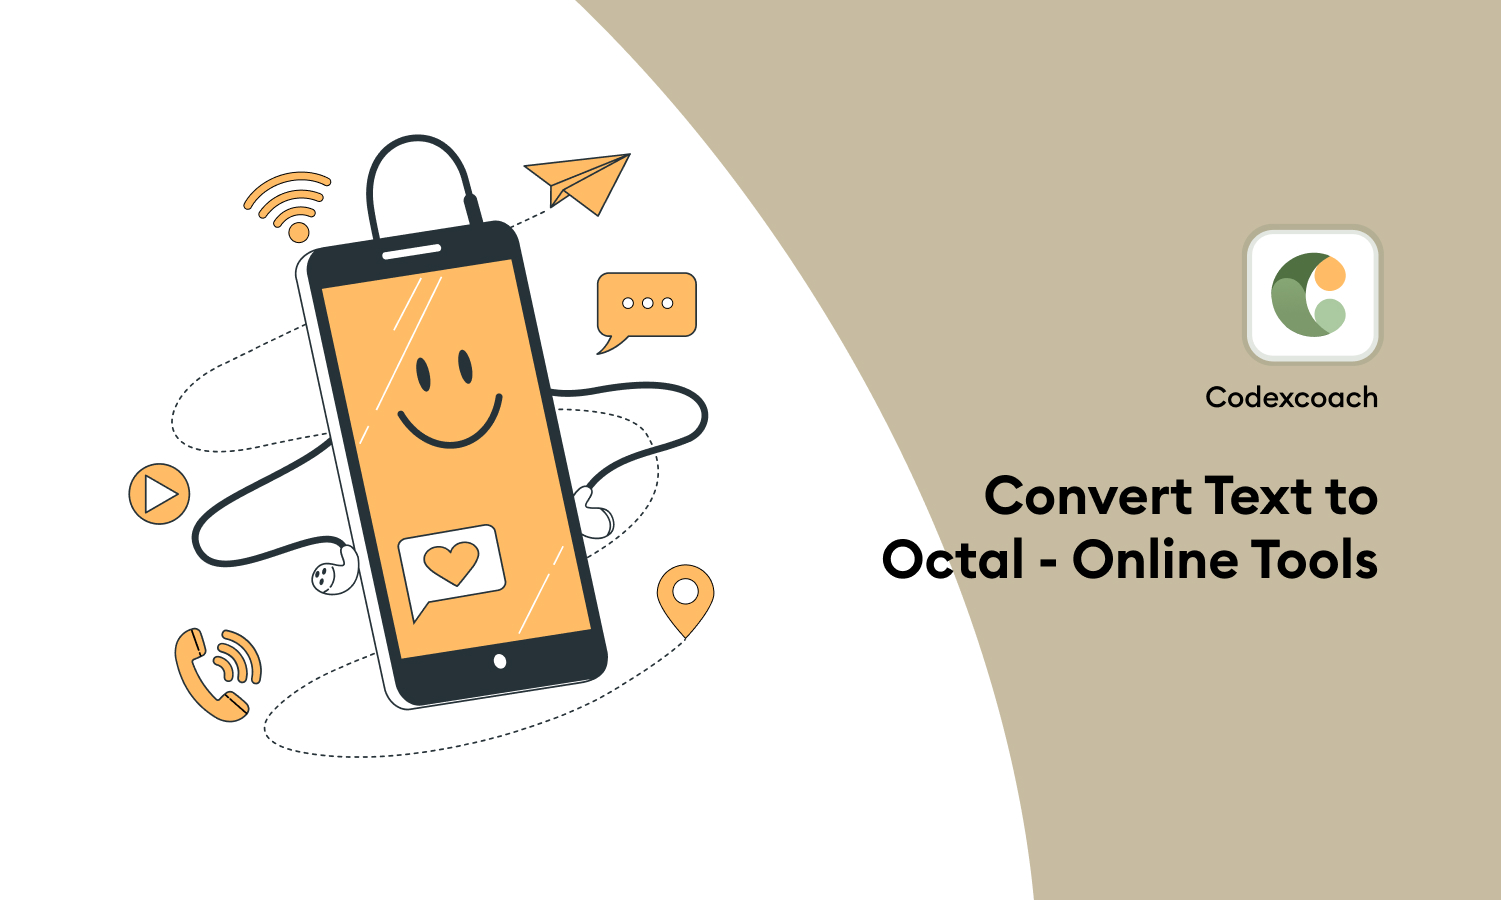 Convert Text to Octal - Online Tools